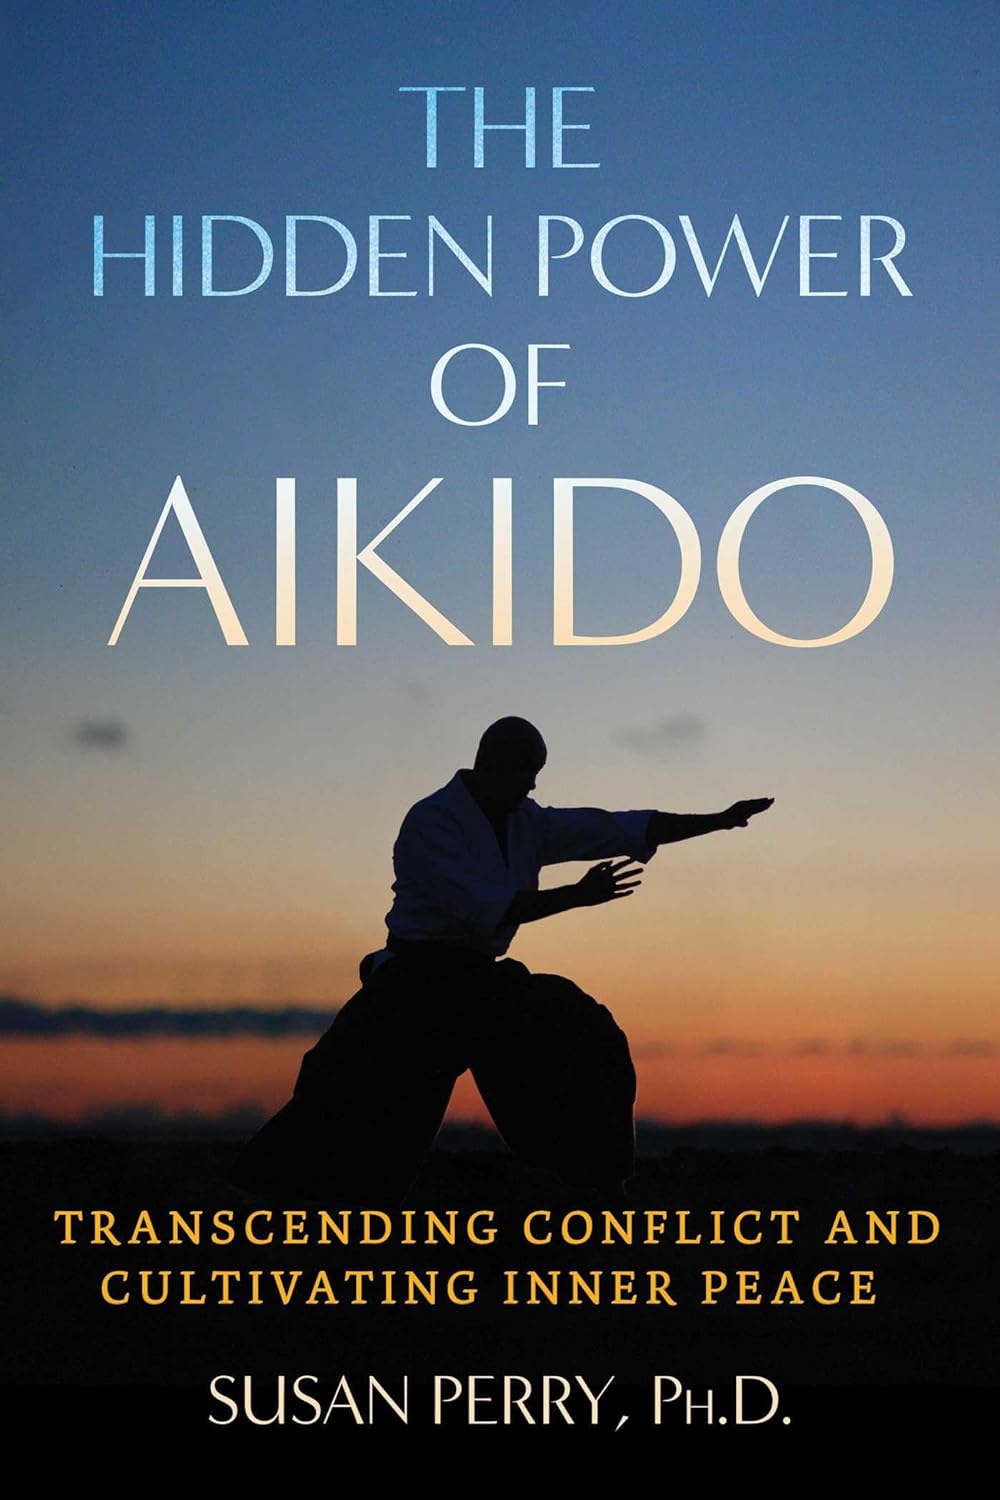 The Hidden Power of Aikido: Transcending Conflict and Cultivating Inner Peace Book by Susan Perry